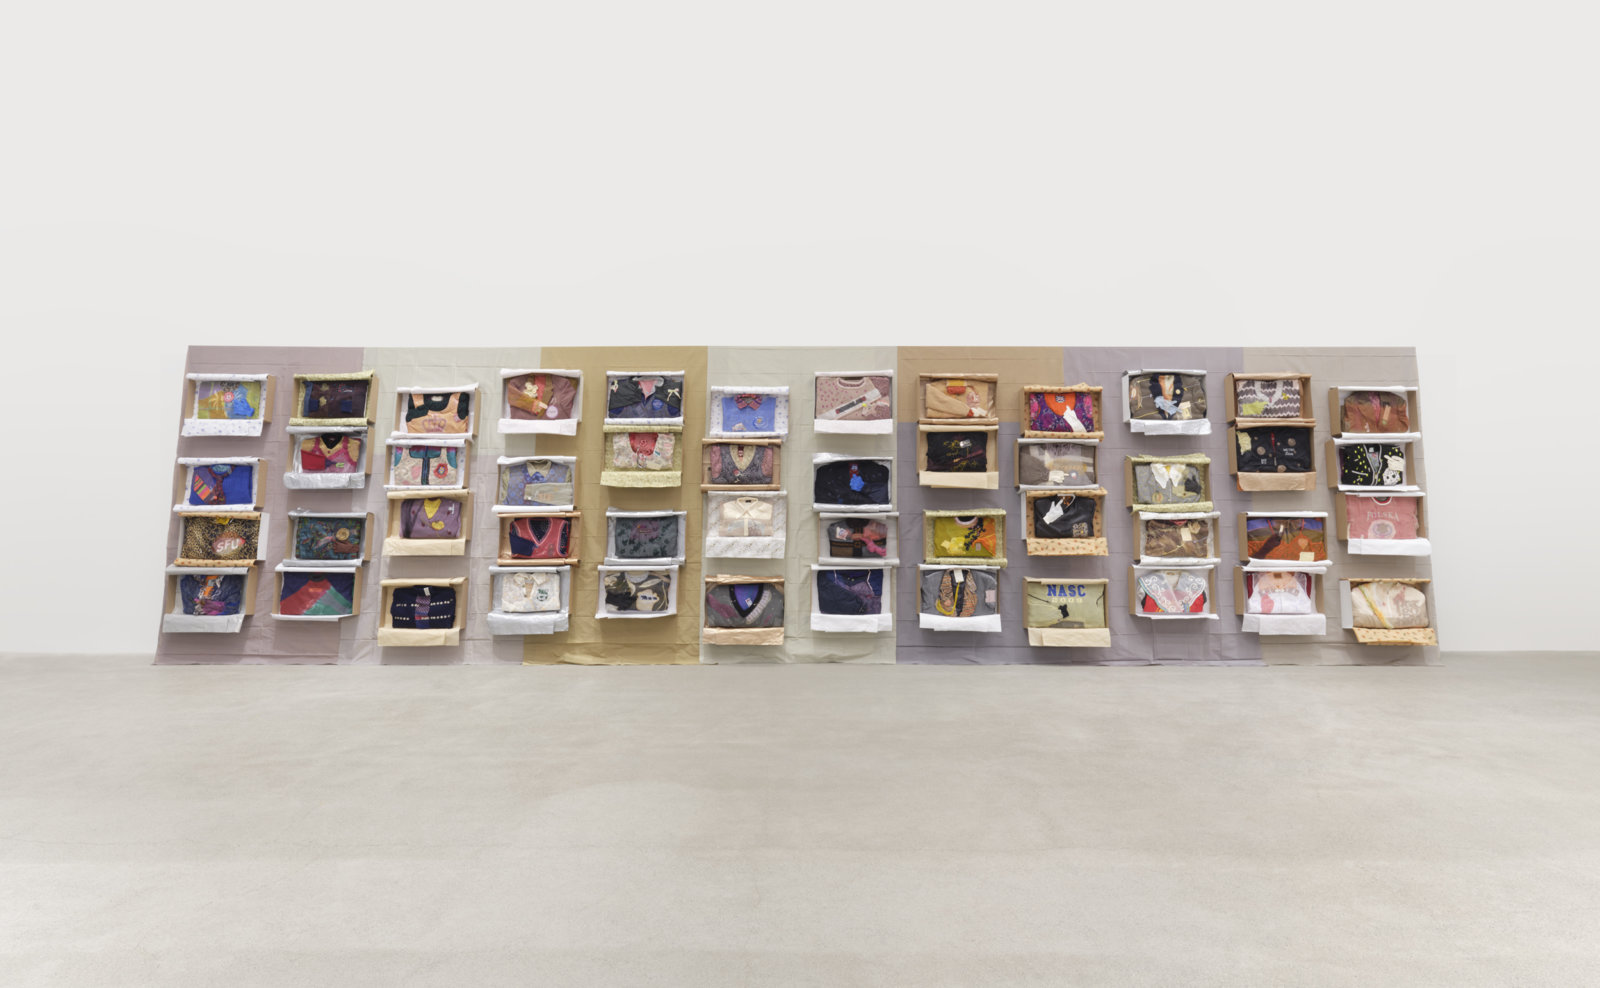 Liz Magor, Being This, 2012/2022, paper, textiles, found materials, 96 x 432 x 22 in. (244 x 1097 x 56 cm)